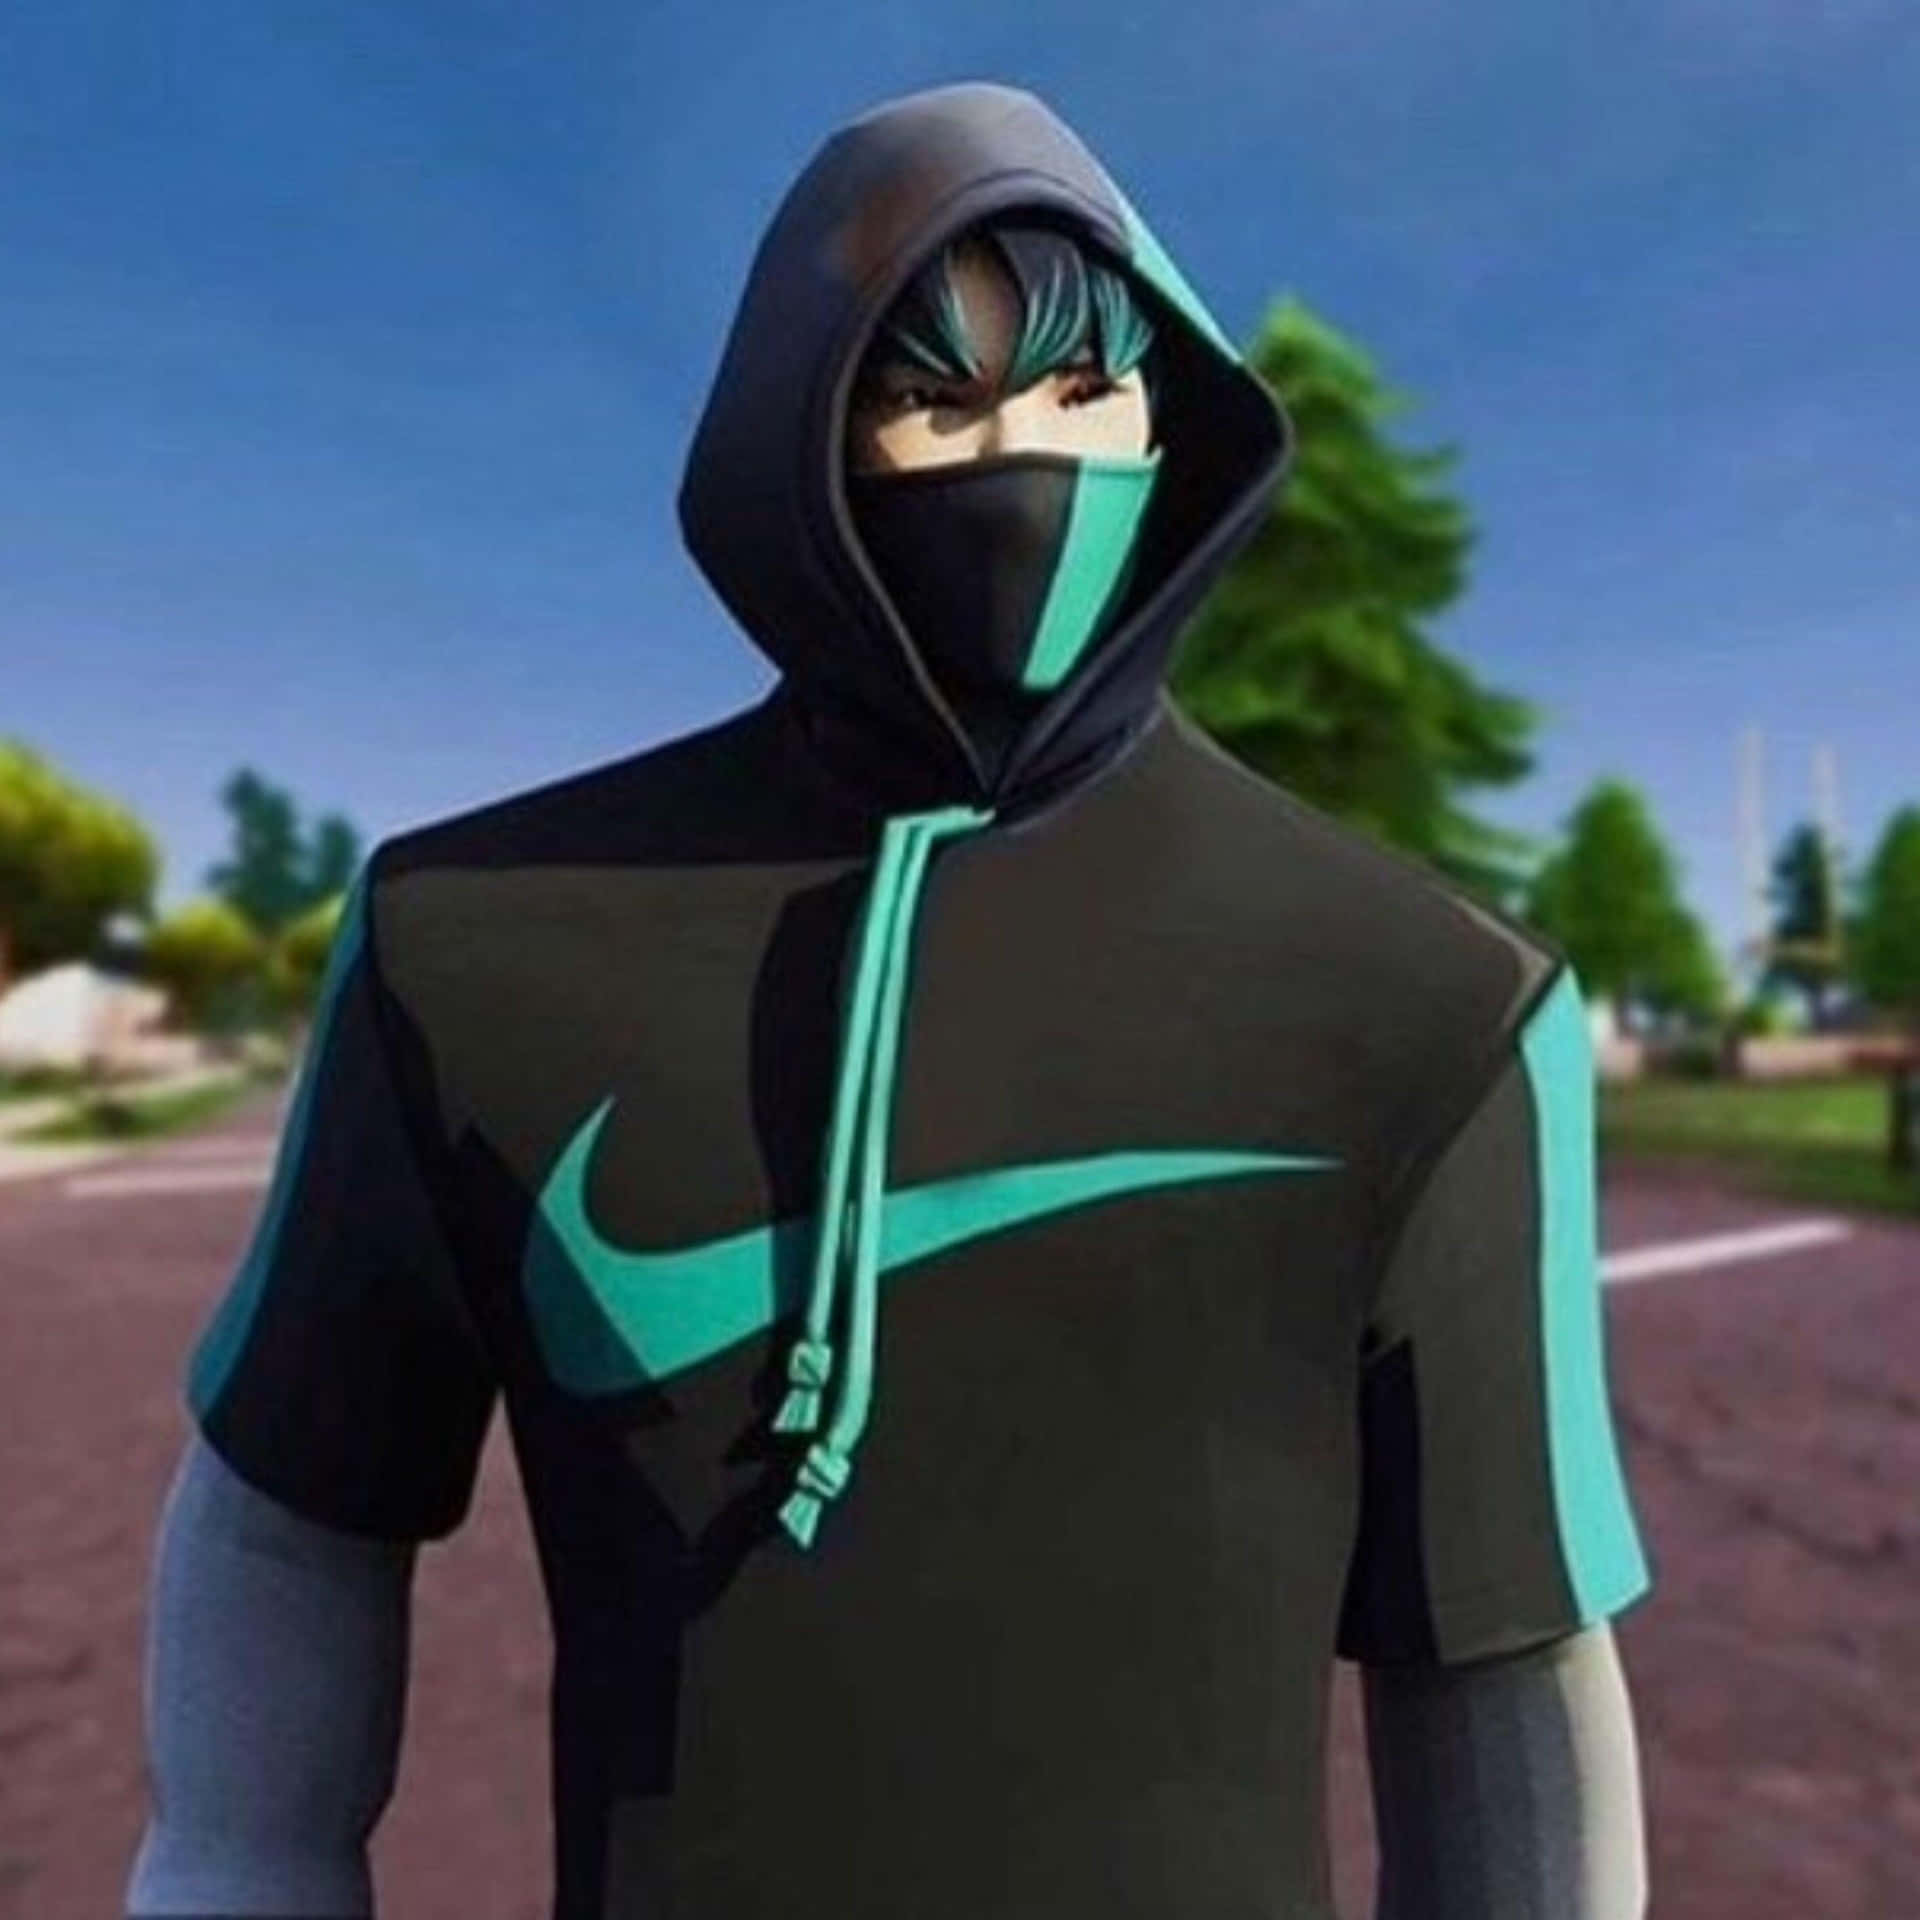 Get The Iconic Fortnite Ikonik Skin For Your Avatar Wallpaper